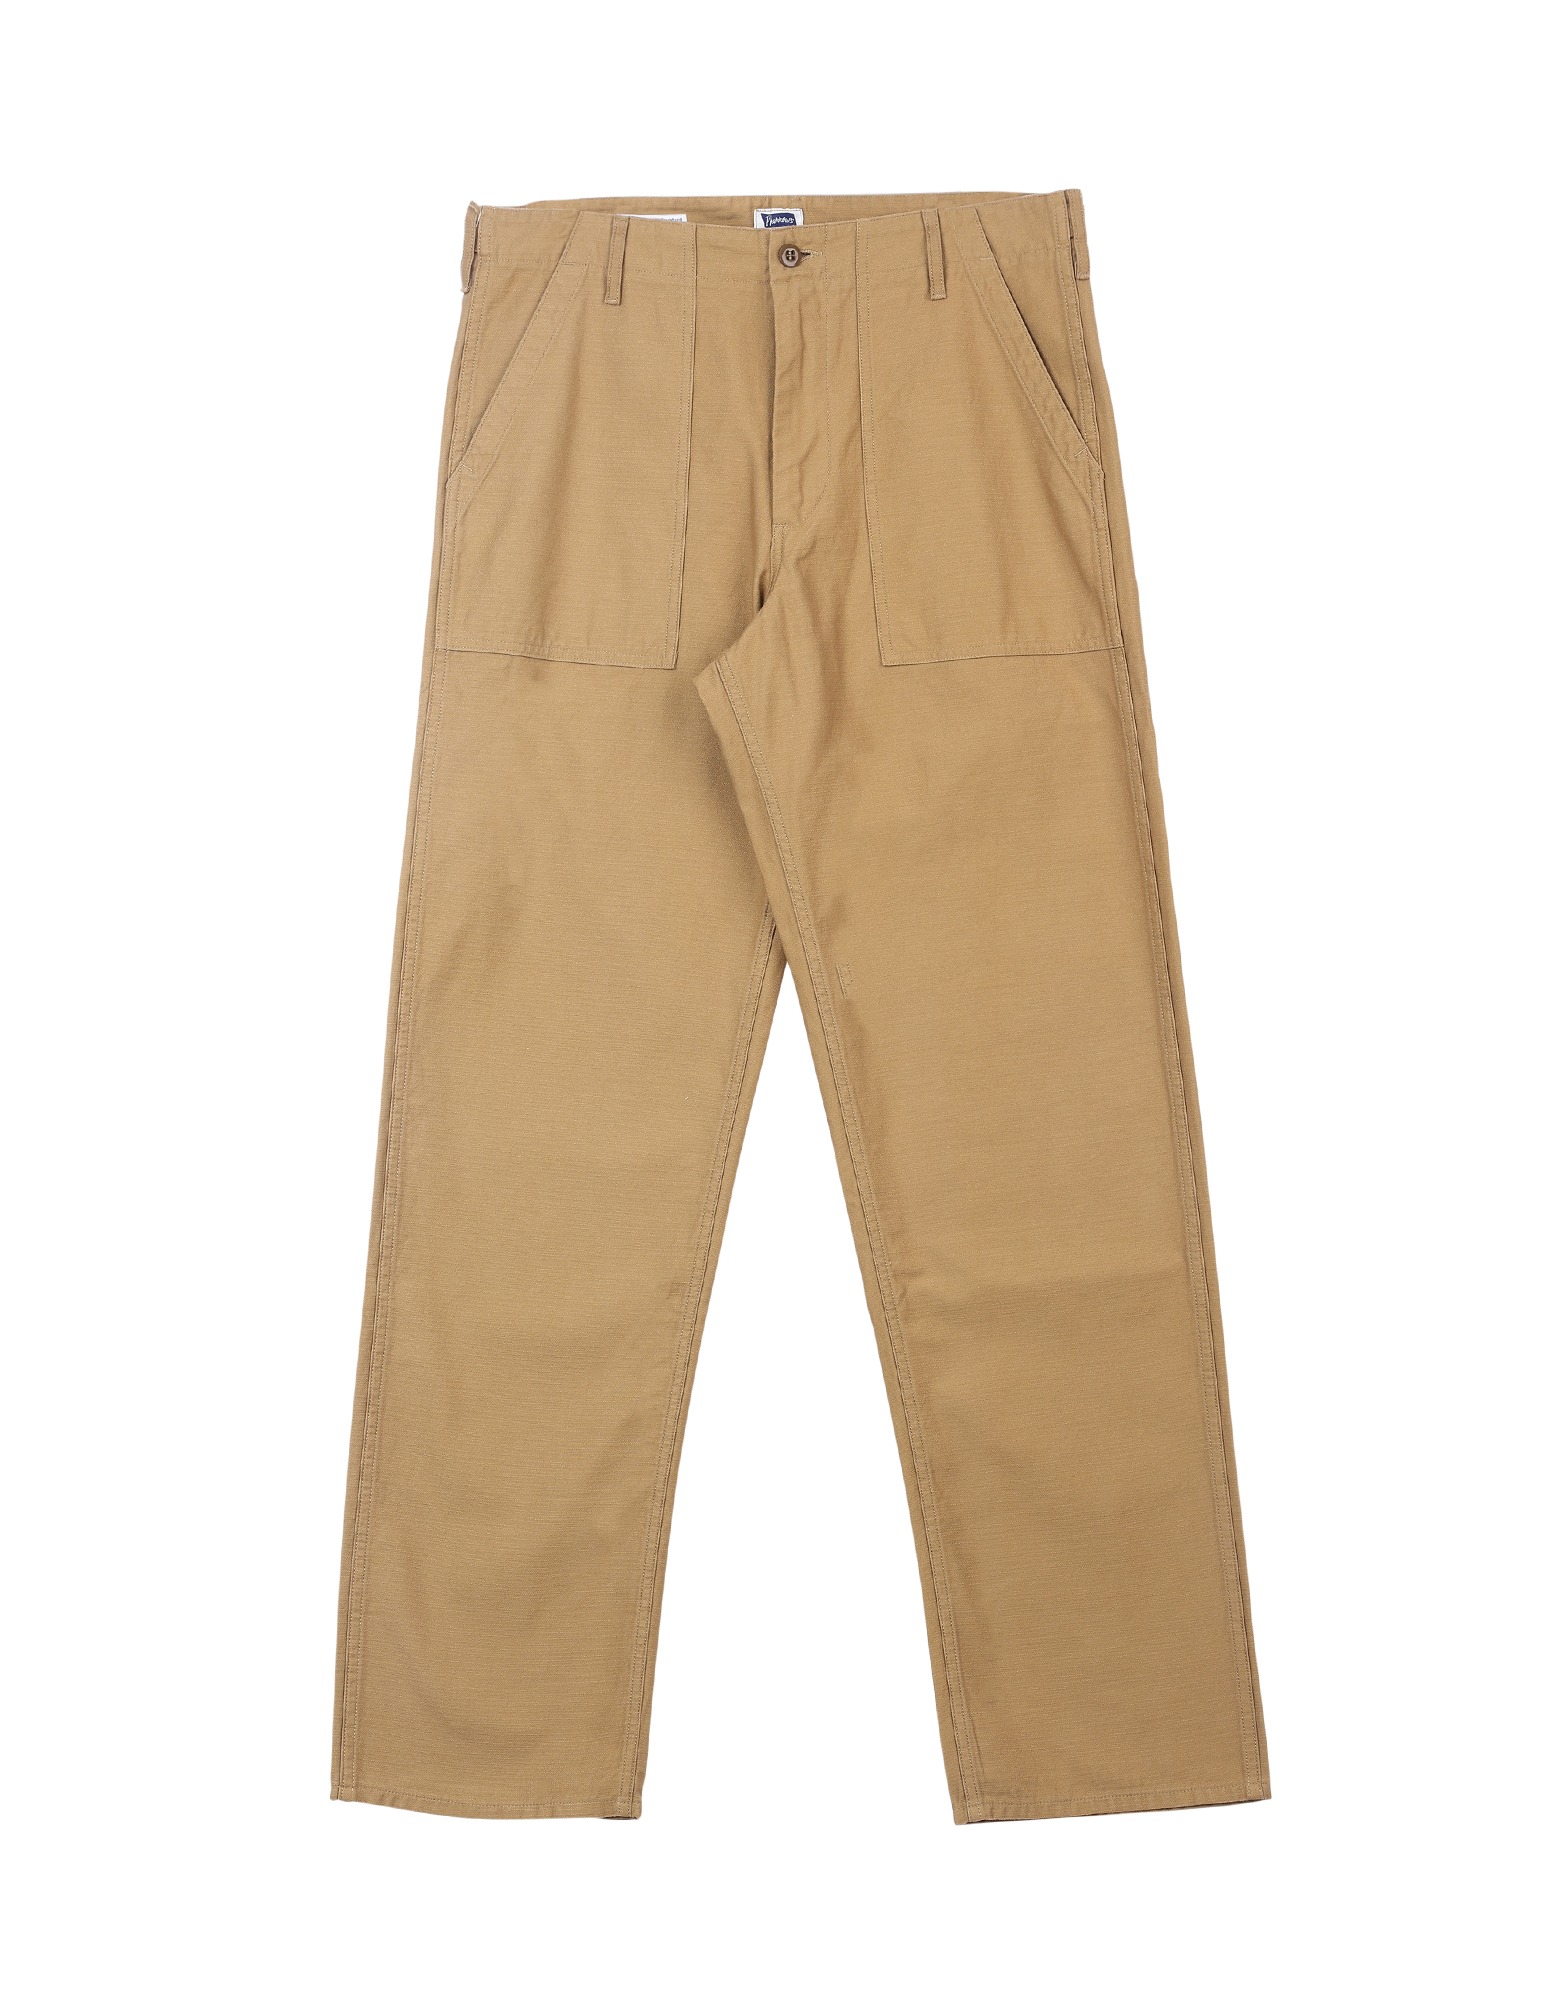 24S-PUP1 Relax Fit Fatigue Utility Pants (Beige)